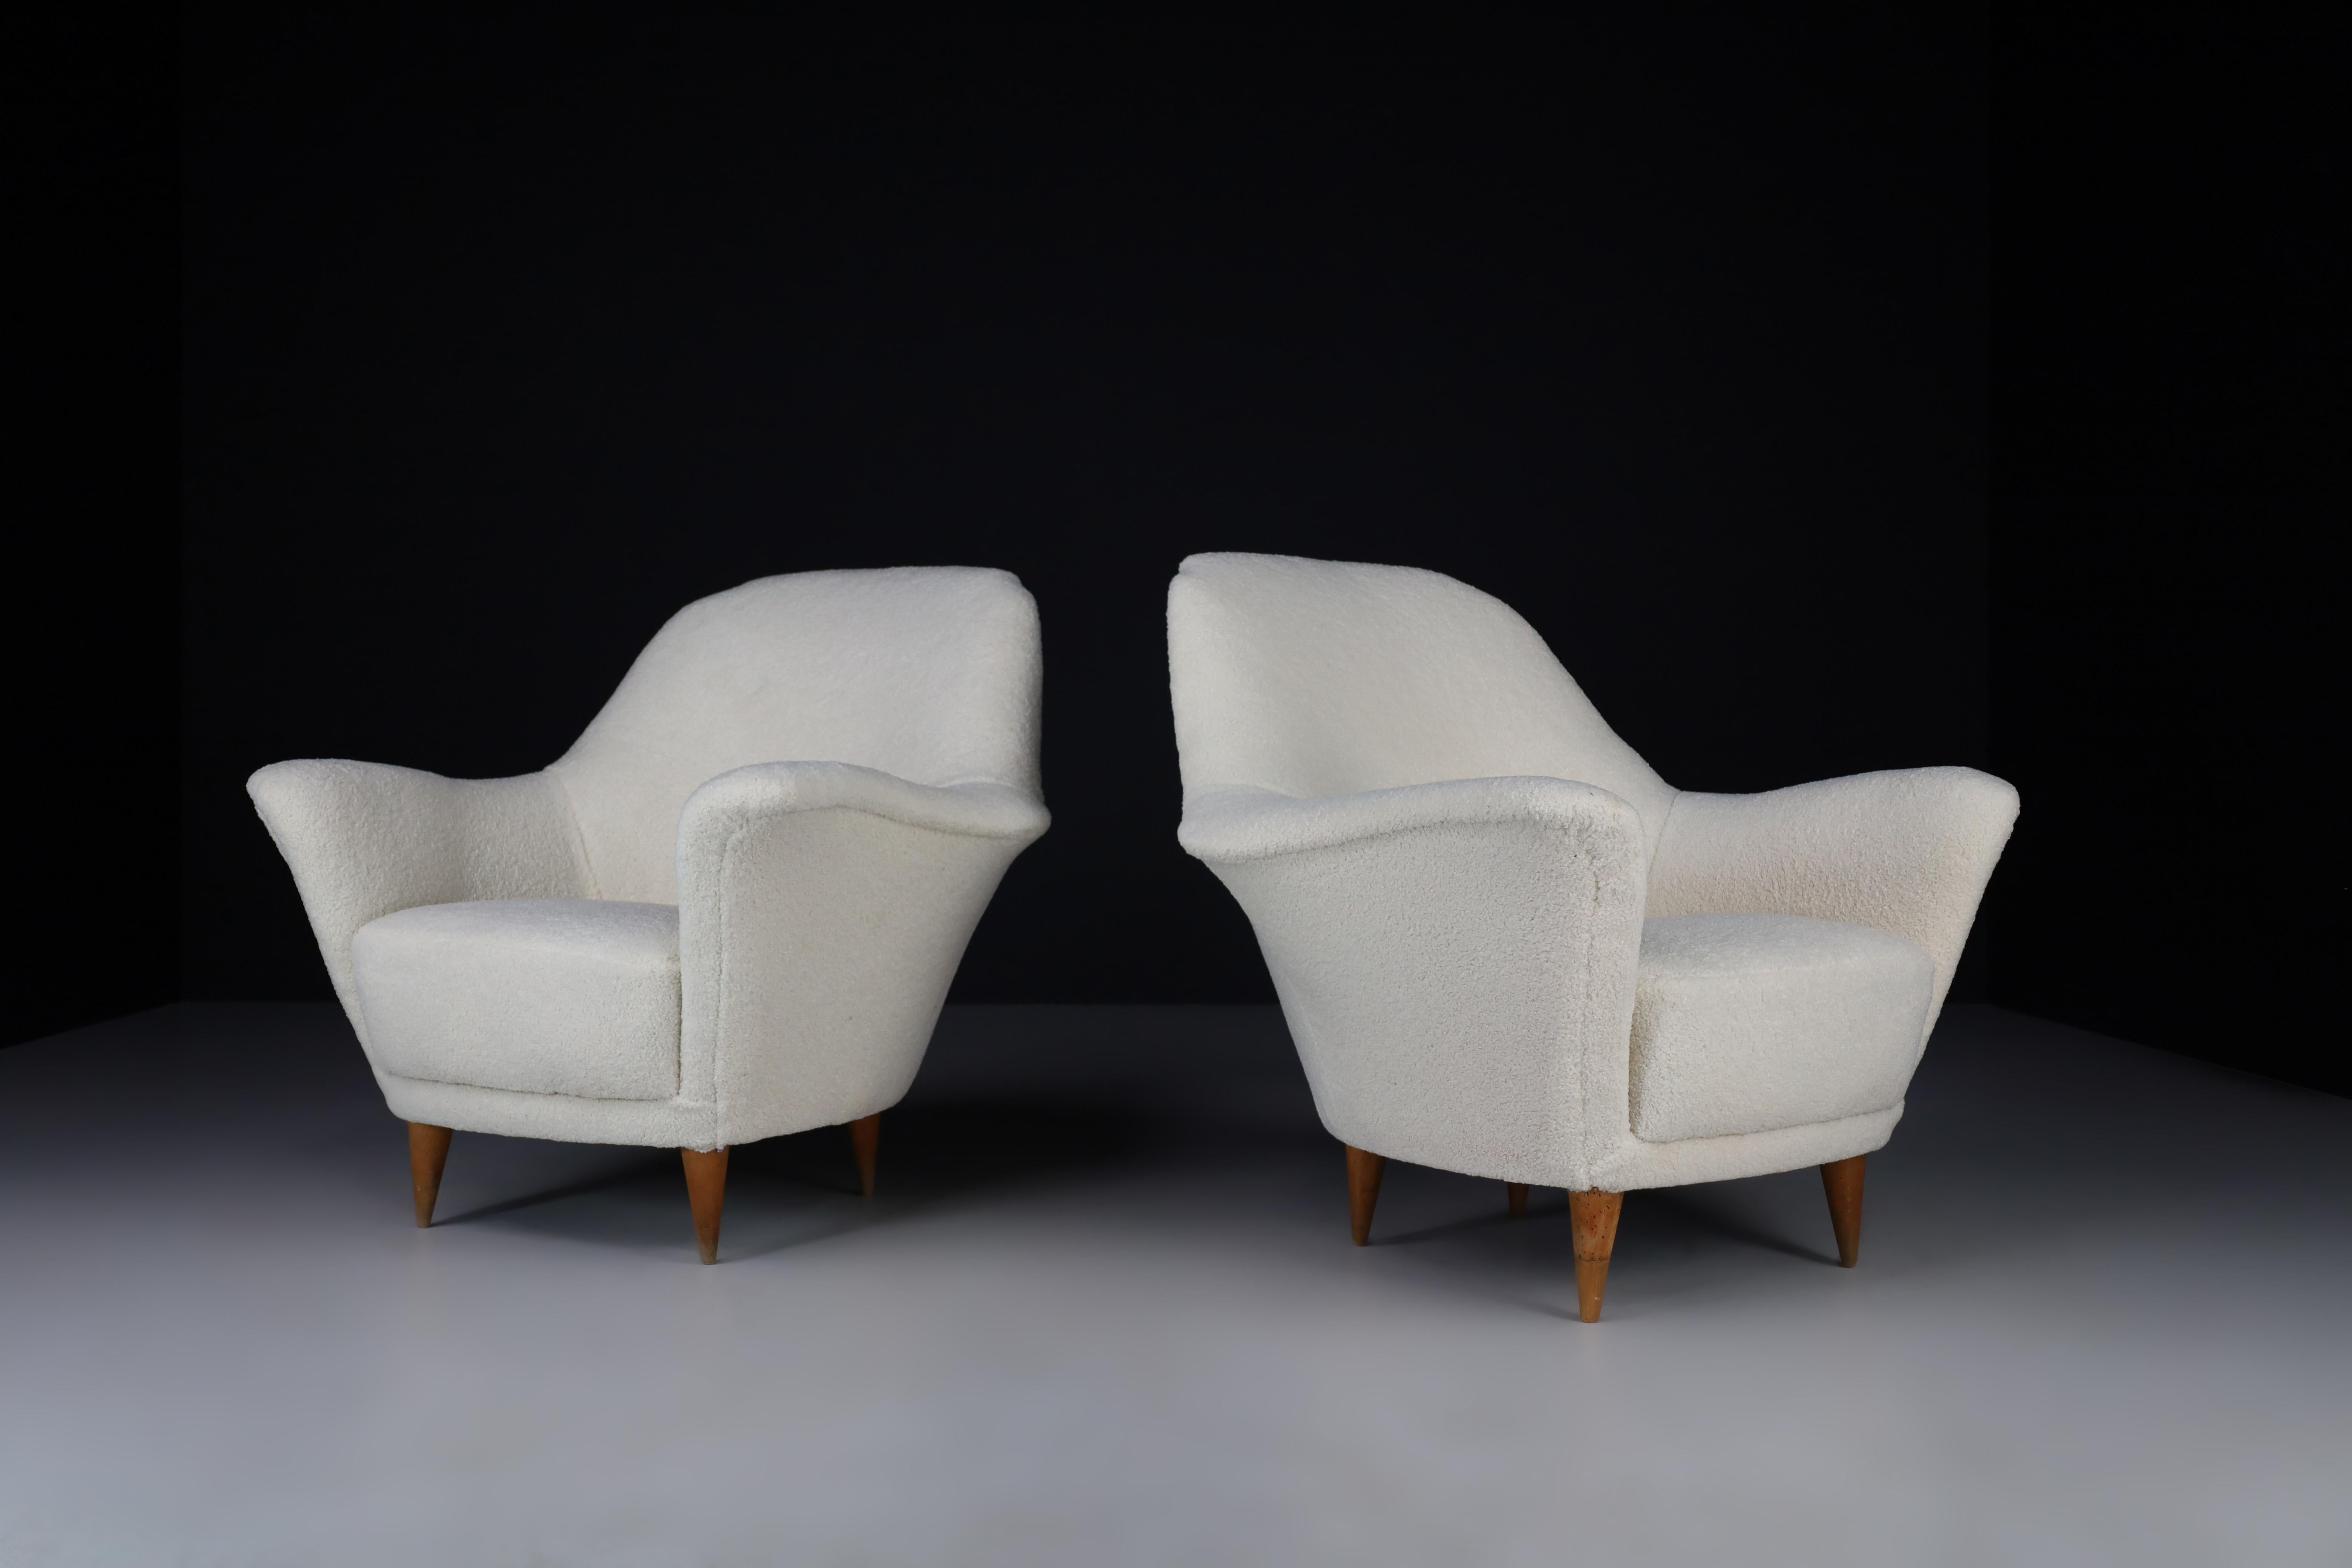 Pair curved armchairs by Ico Parisi in newly upholstered teddy fabric, Italy 1950s

Pair of Italian 1950s curved armchairs, attributed to Ico Parisi .(also sometimes attributed to Federico Munari). These chairs are of curved organic form with